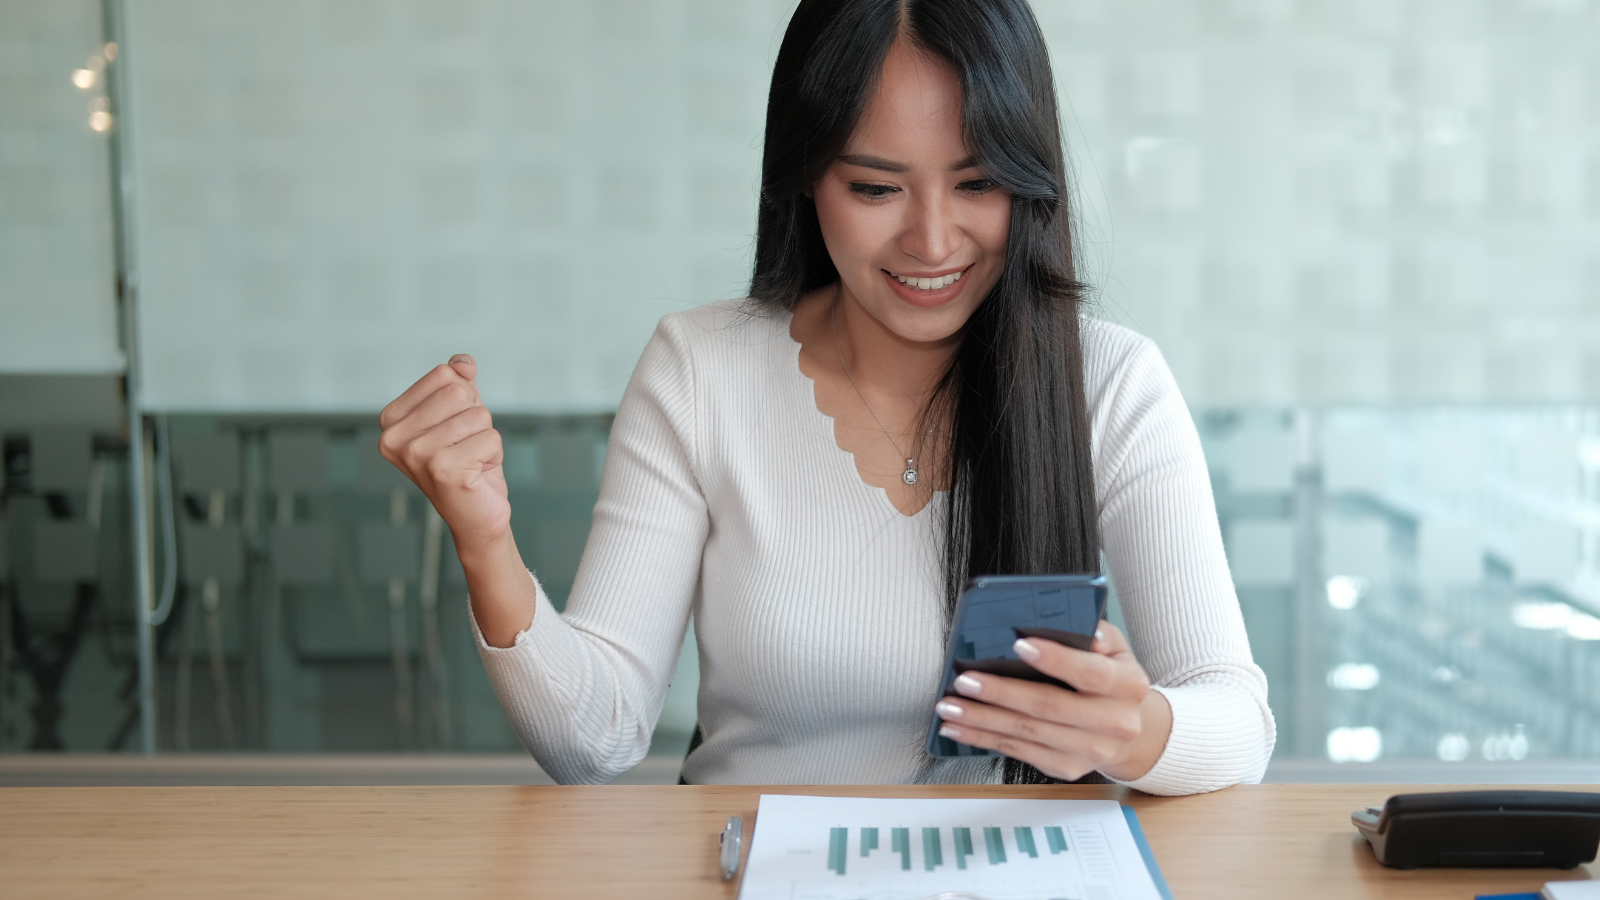 Woman with an excited expression looking down at smartphone in her hand